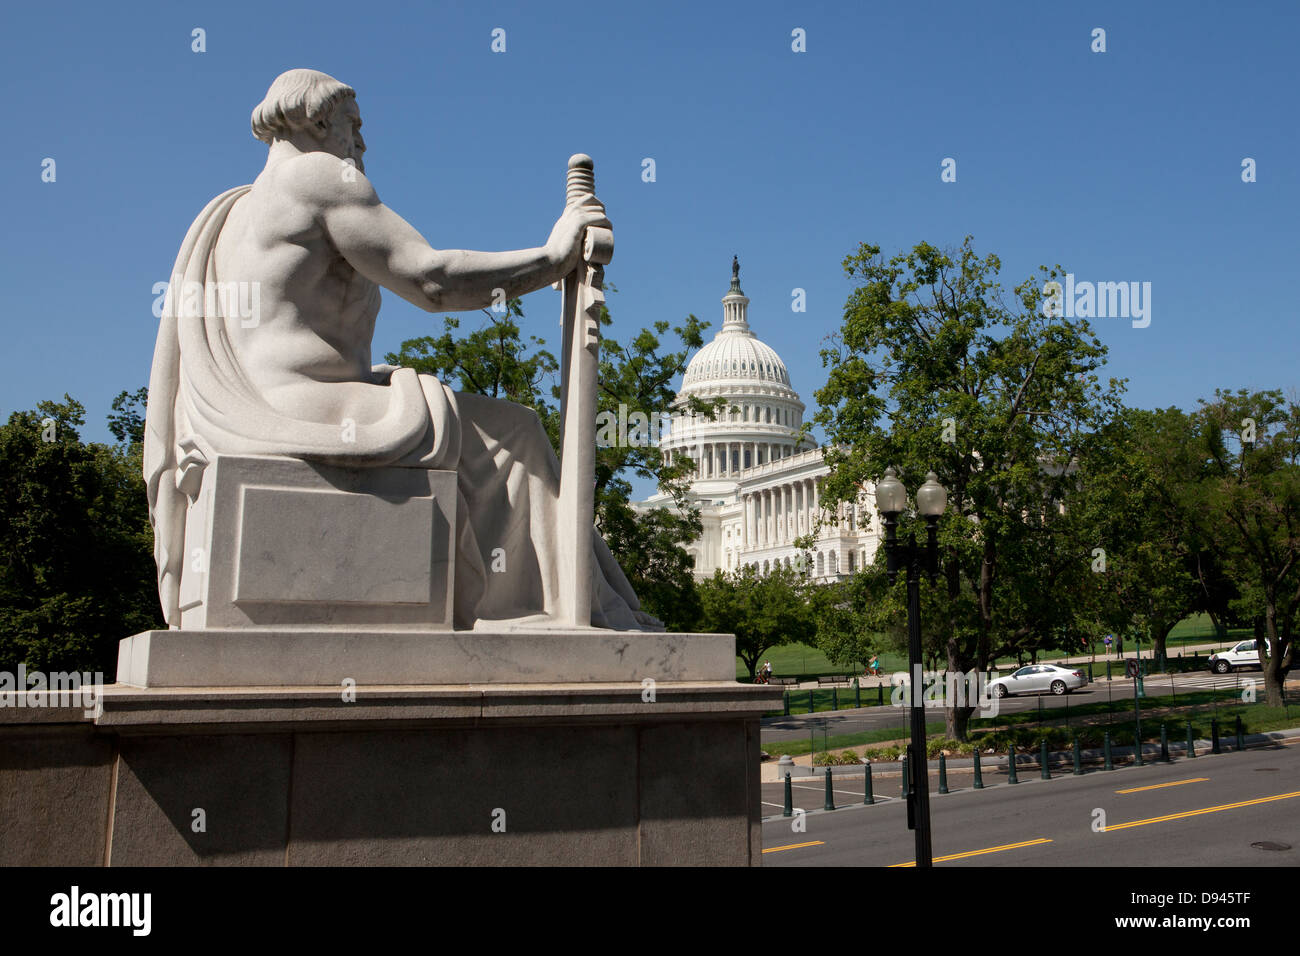 Majesty of Law sculpture at the Rayburn US House of Representatives building  - Washington, DC USA Stock Photo